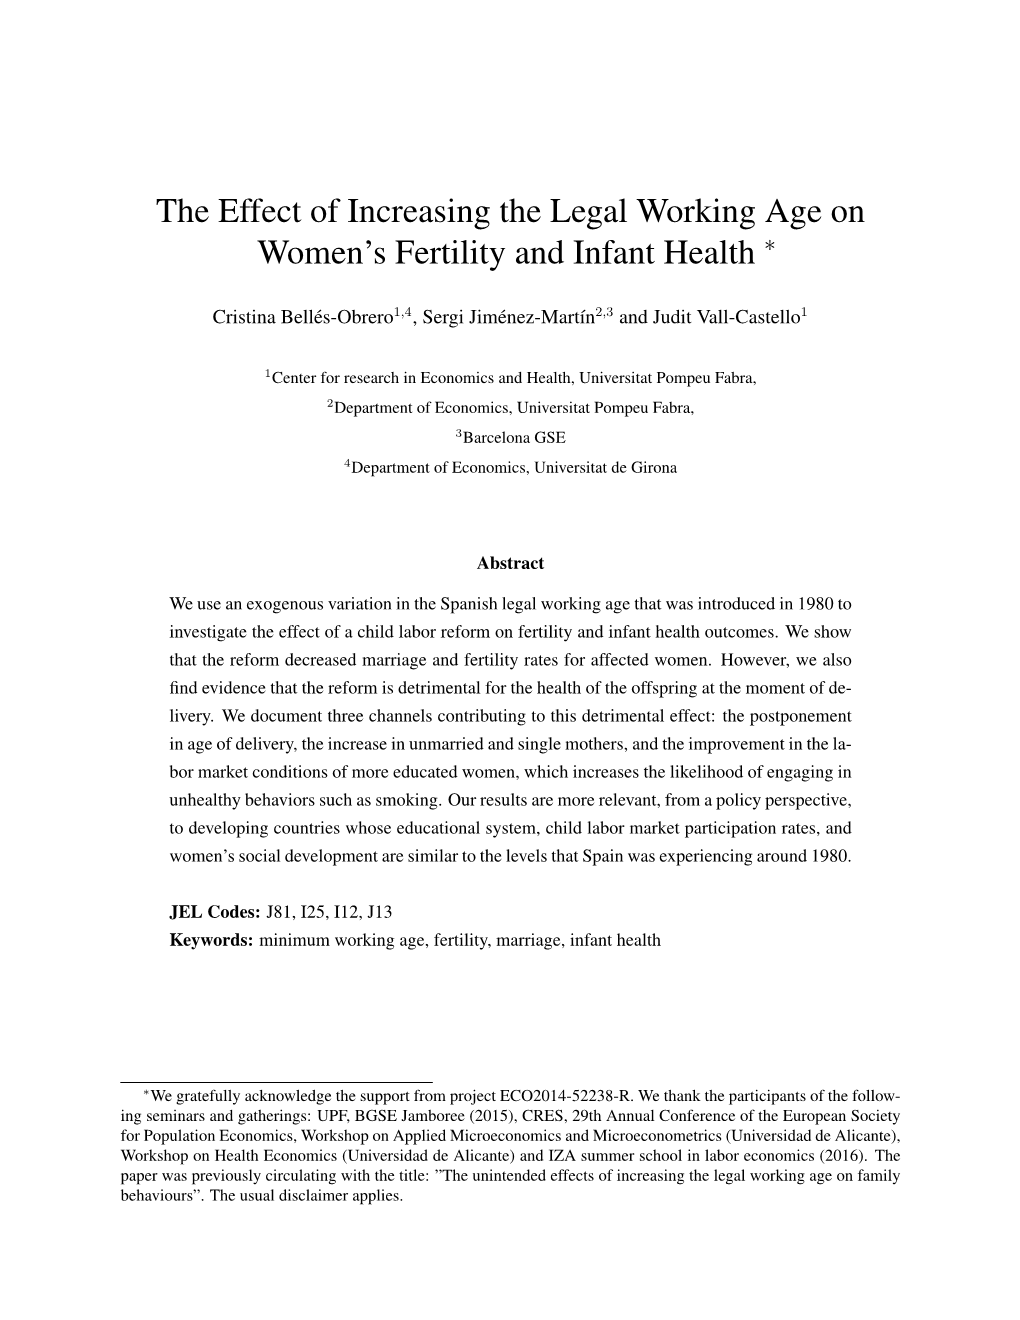 The Effect of Increasing the Legal Working Age on Women's Fertility